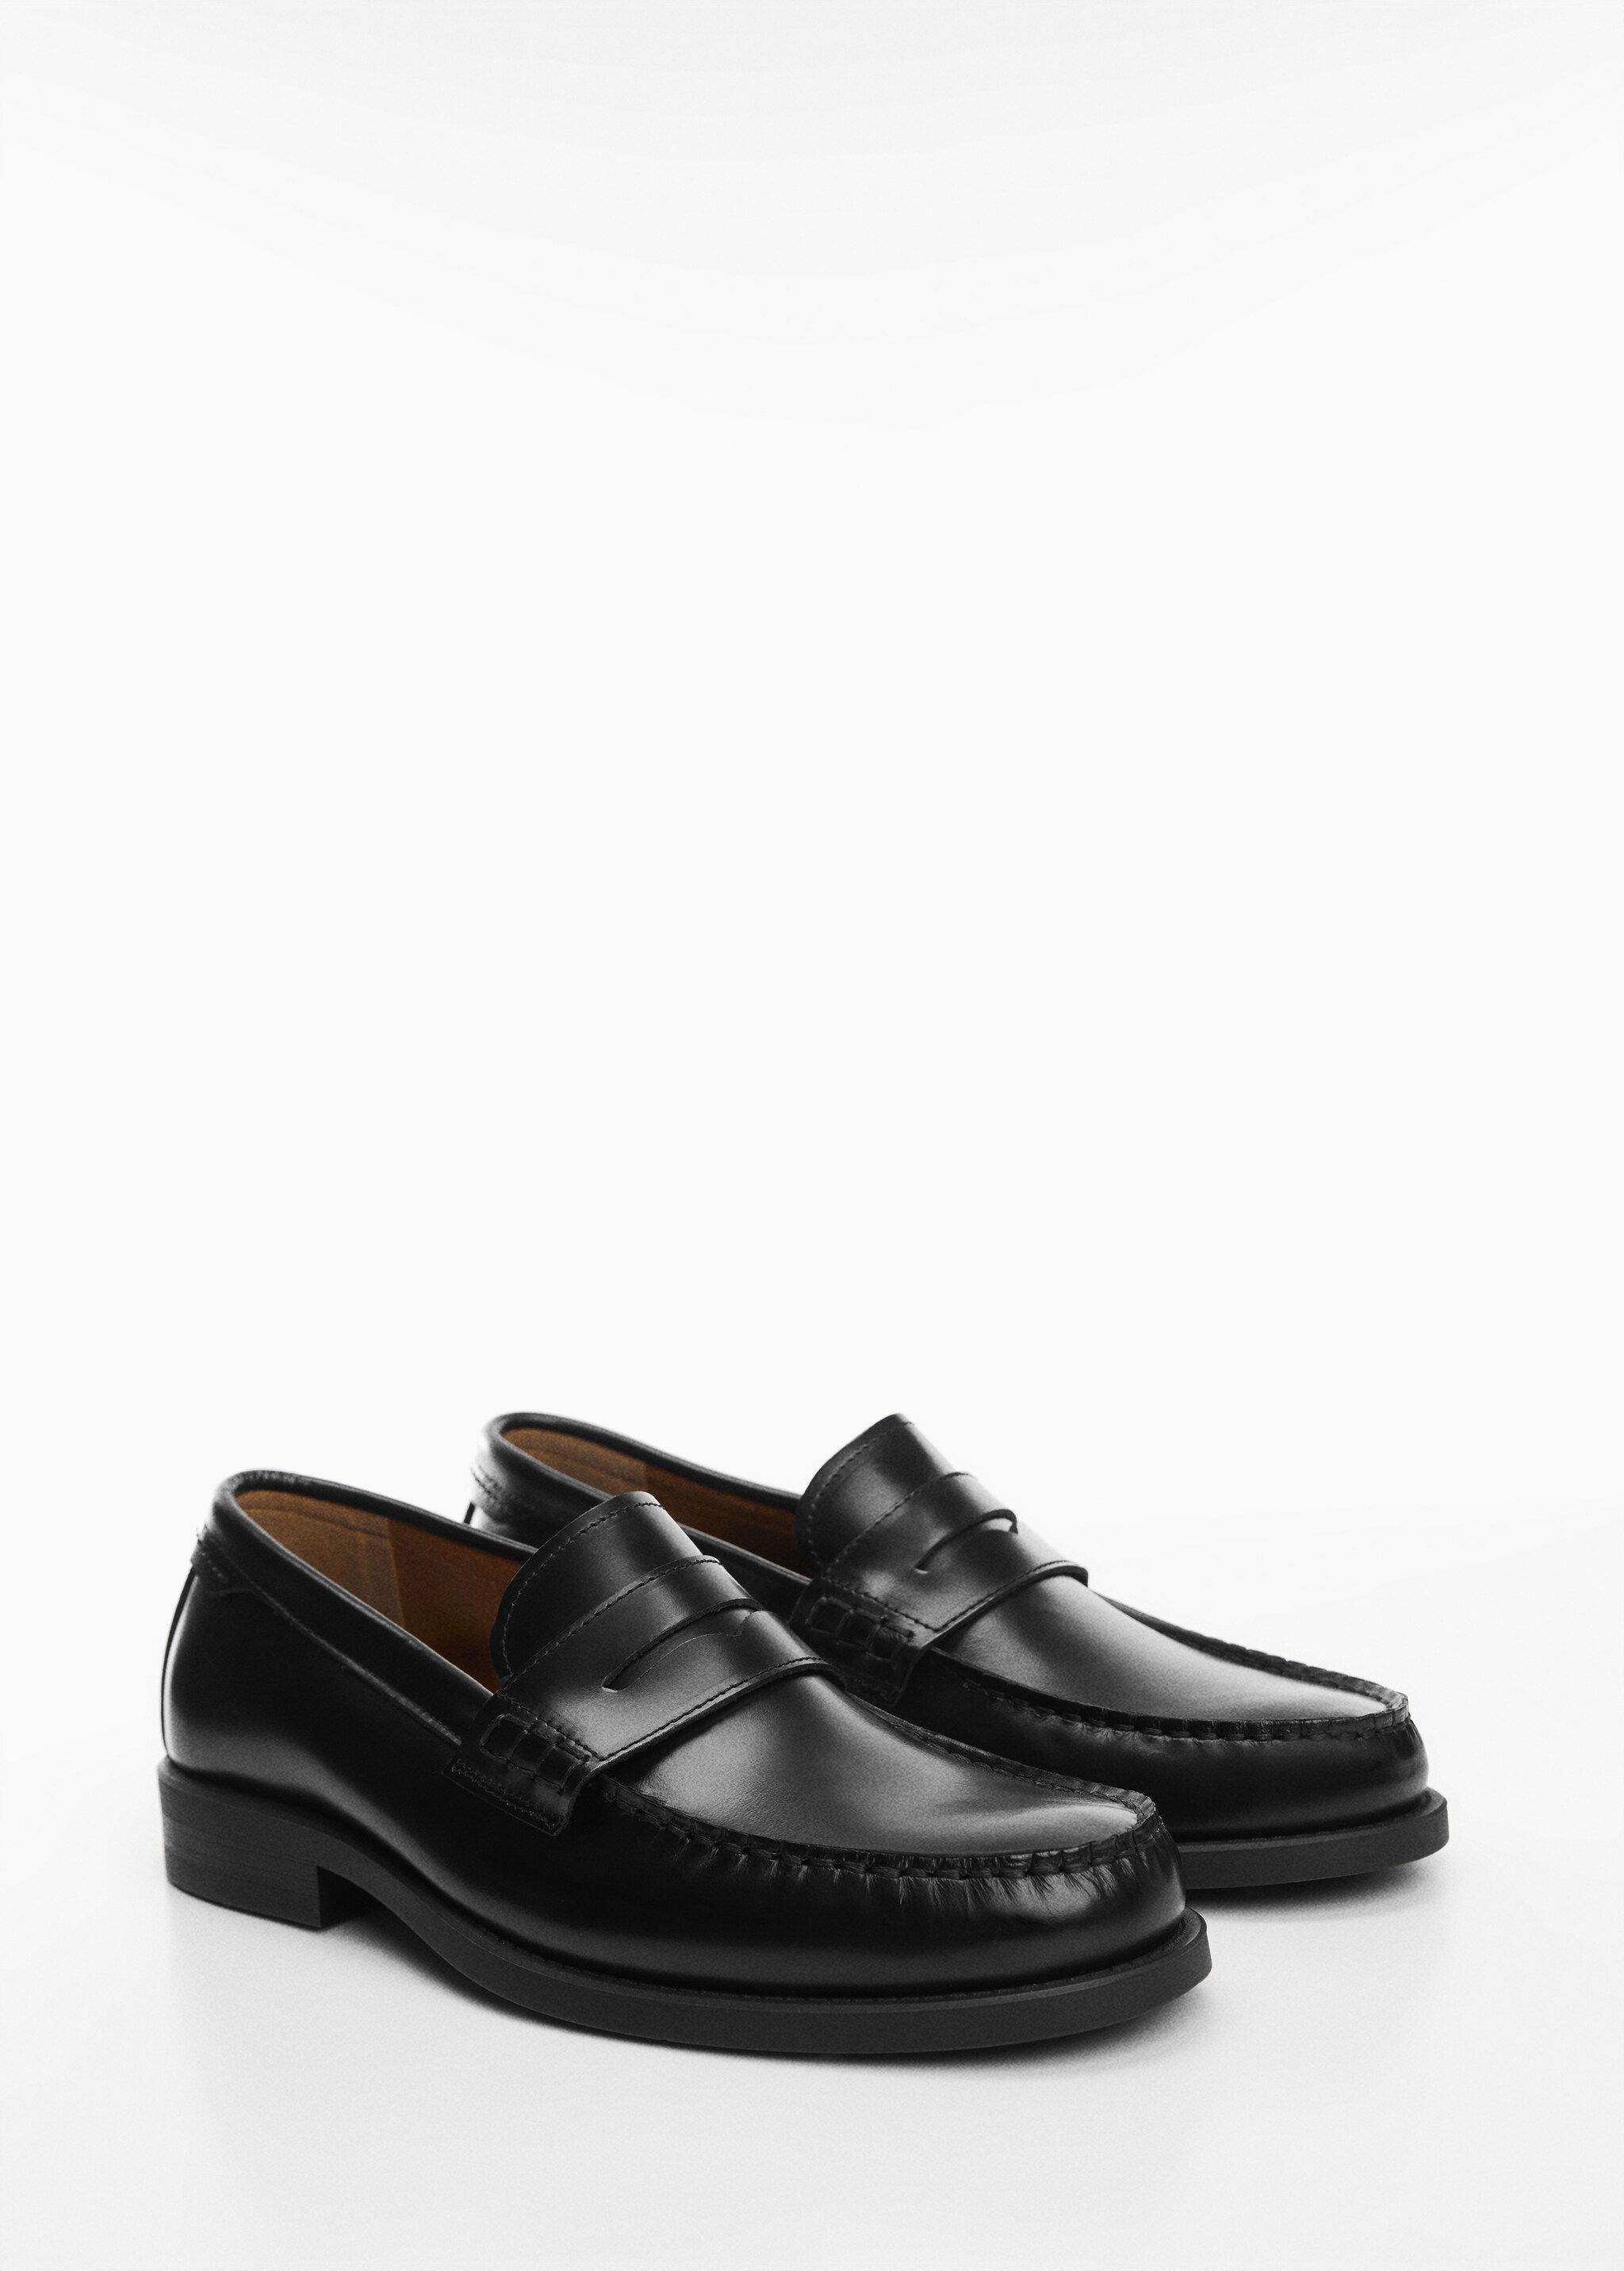 Aged-leather loafers - Medium plane